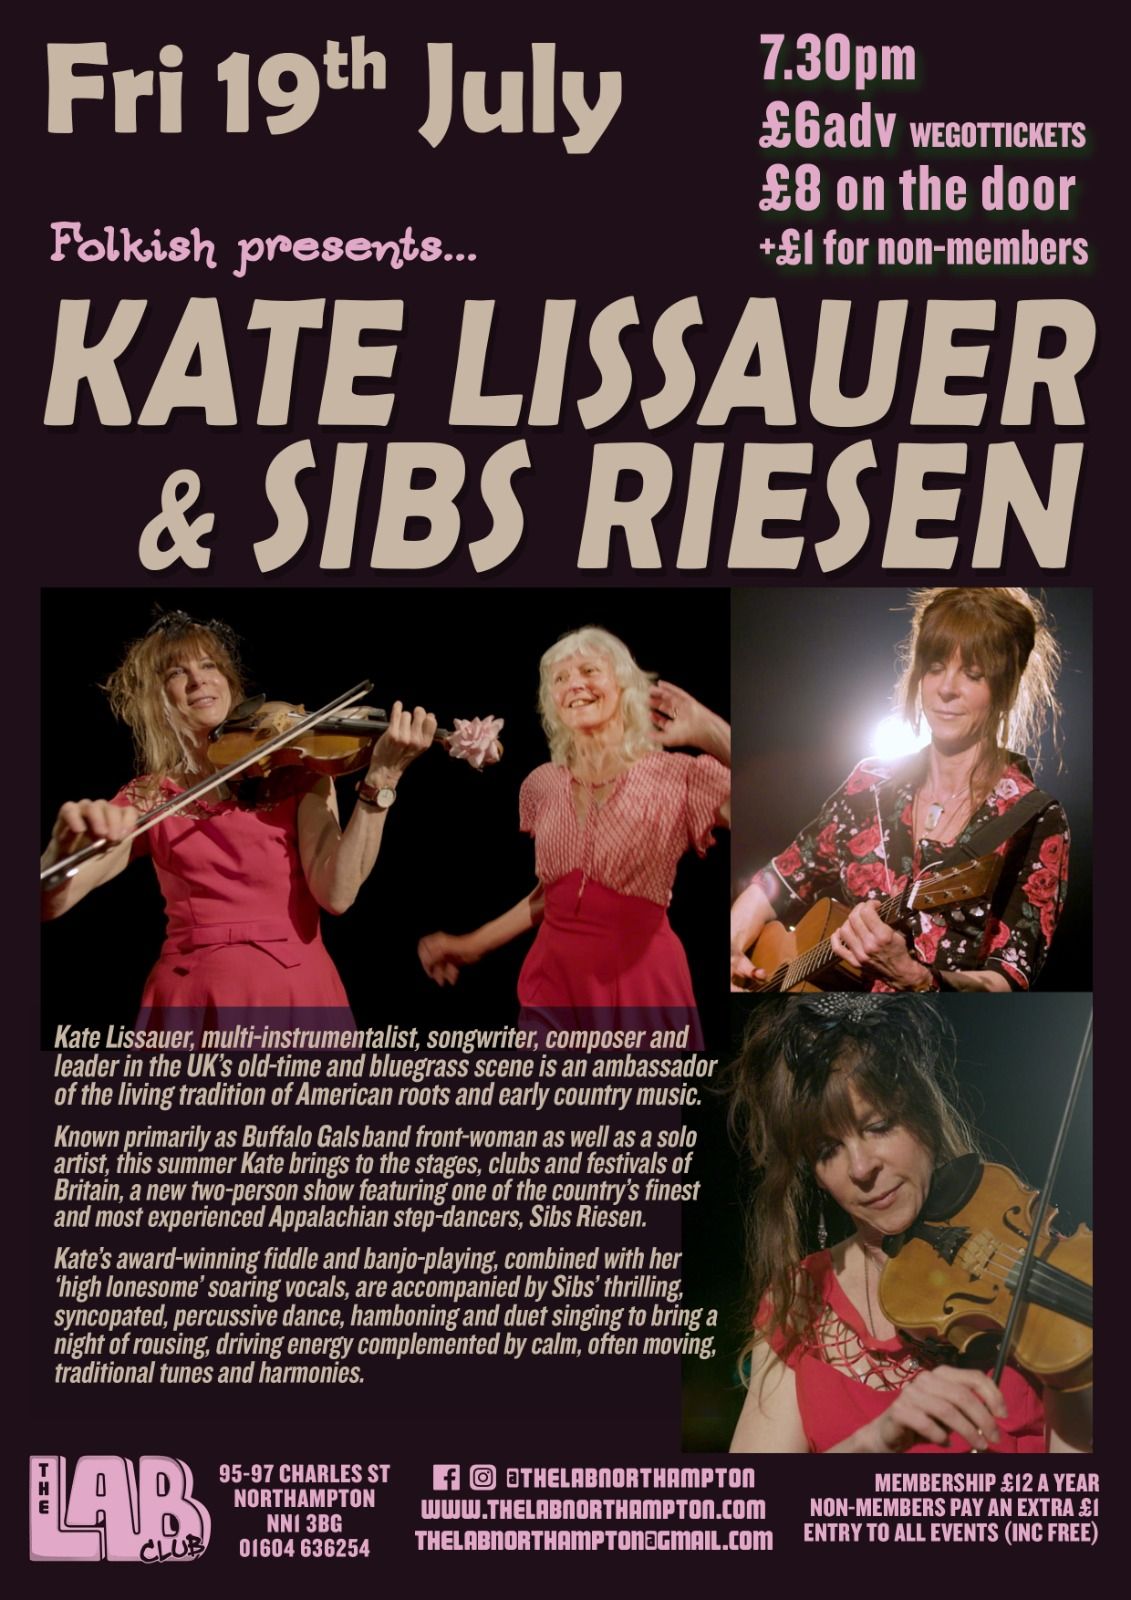 Folkish presents...Kate Lissauer & Sibs Riesen -  with support from Russell Heyworth